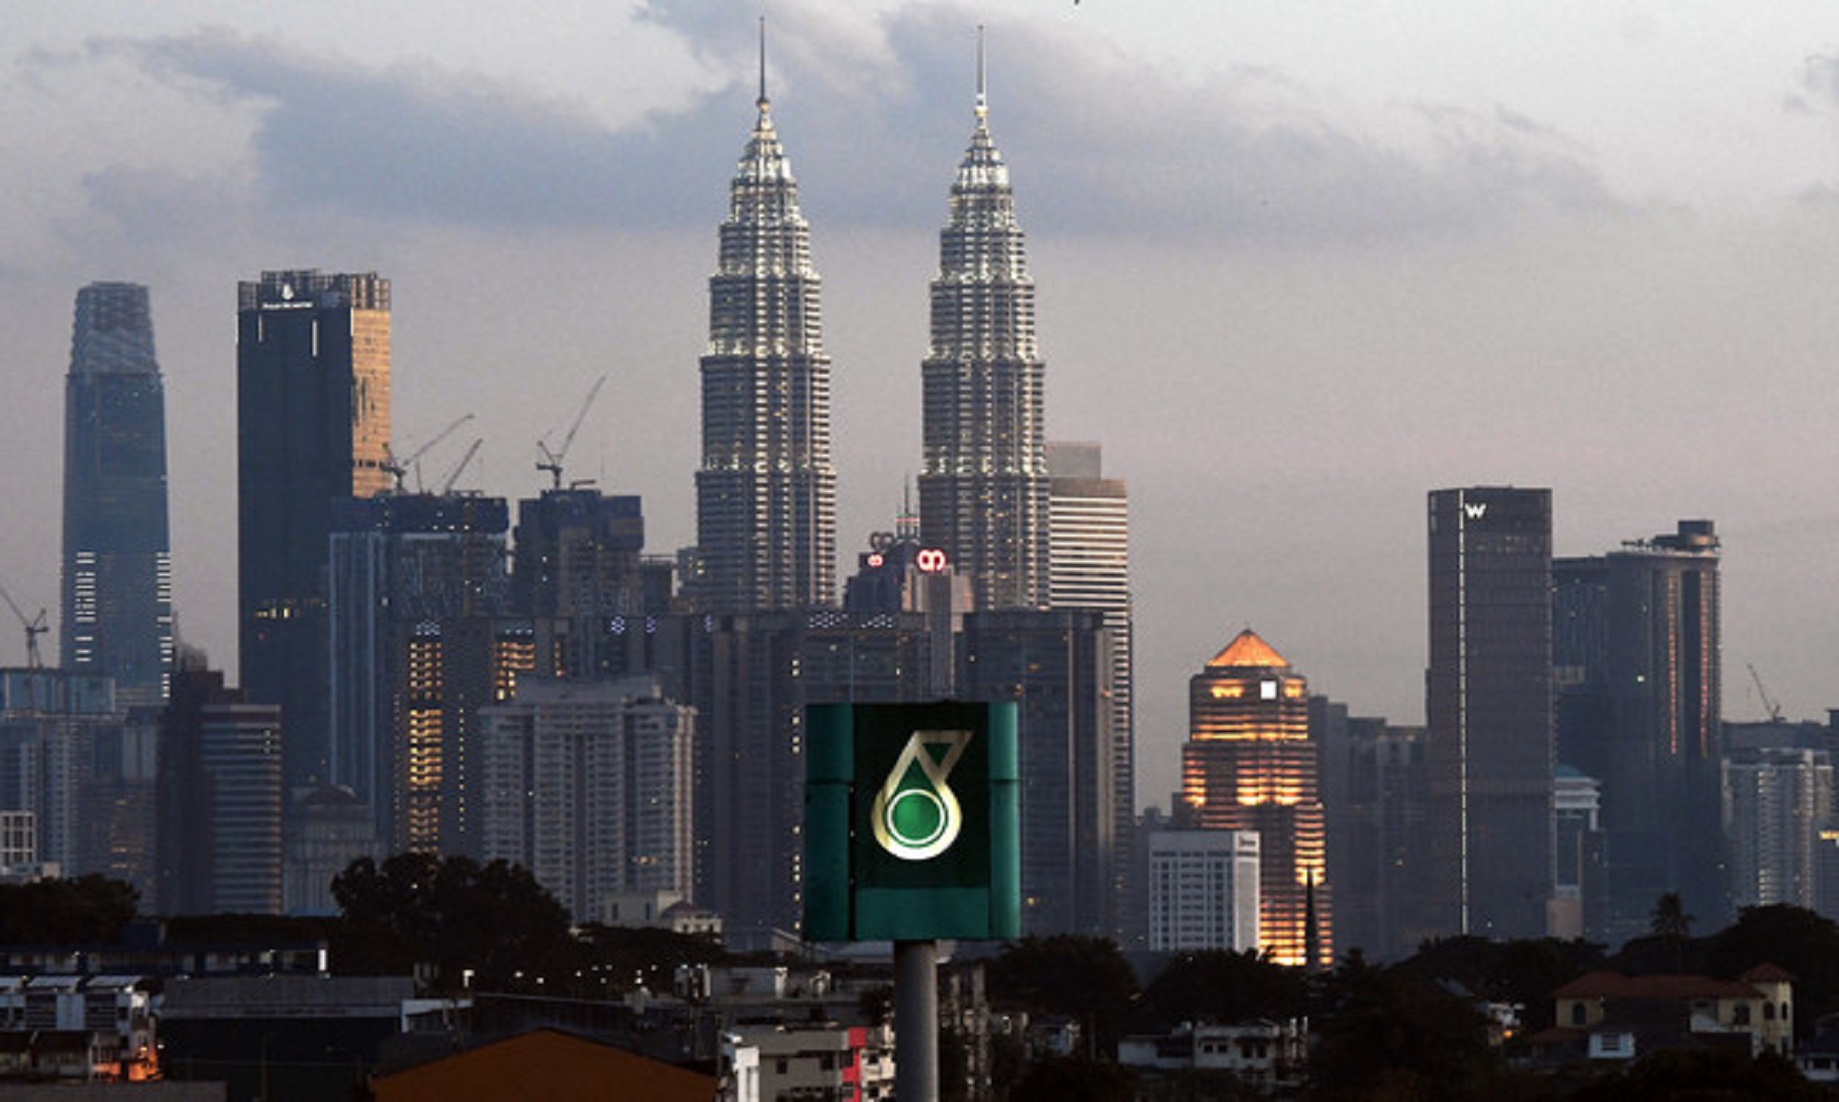 National oil company Petronas assures there will be no retrenchment